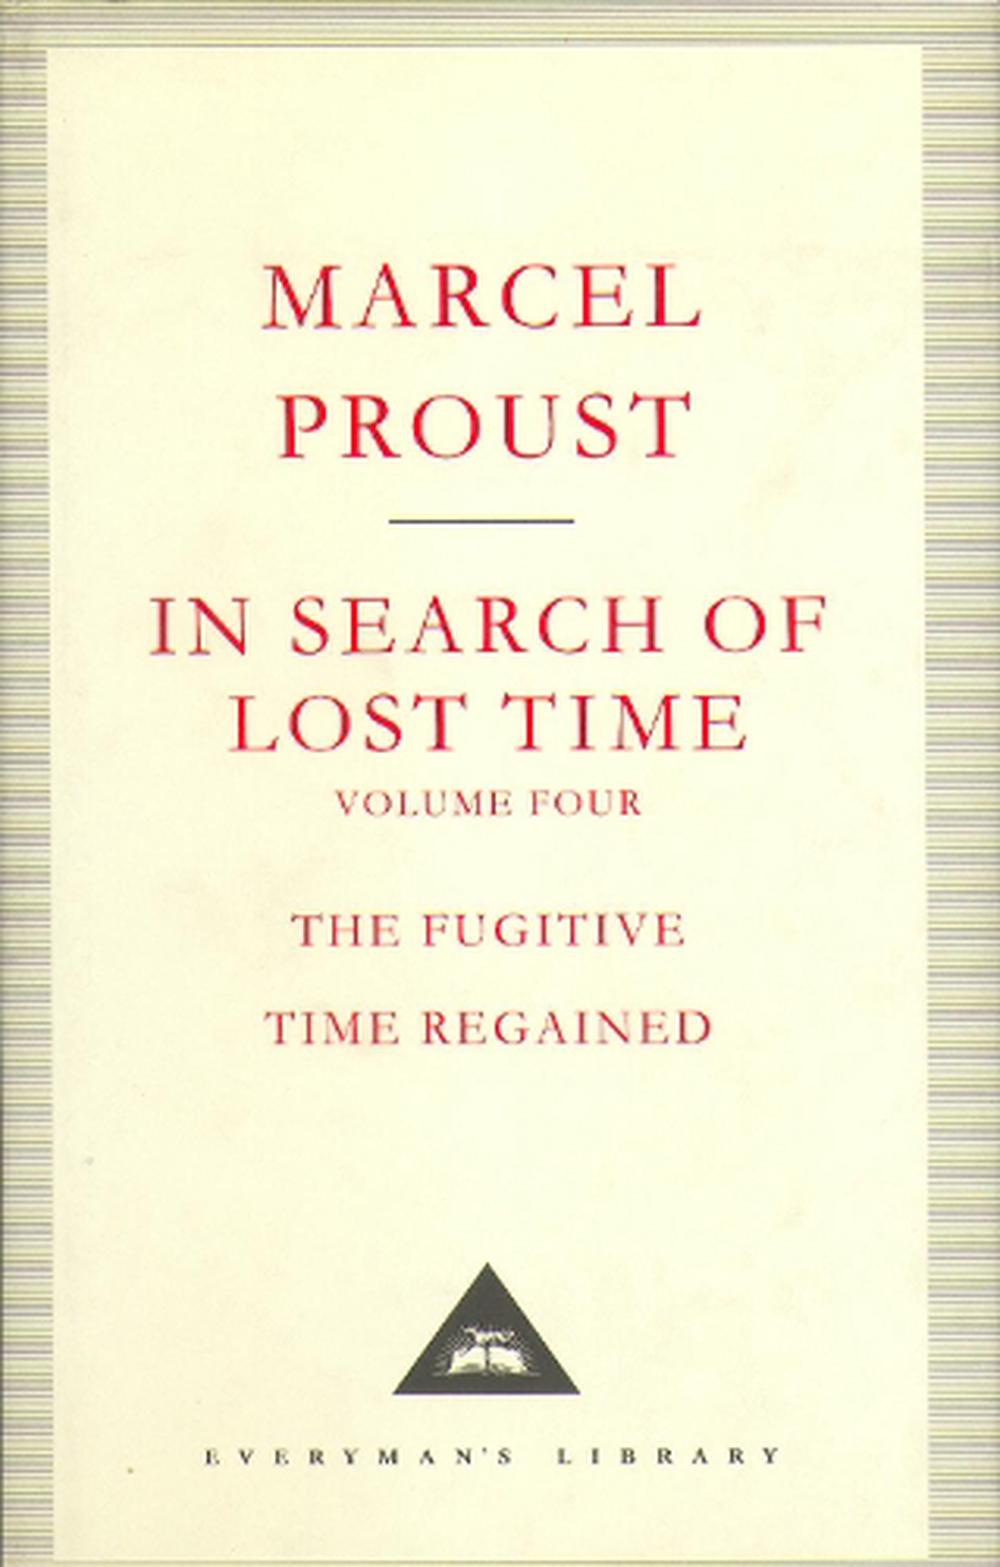 in search of lost time book review